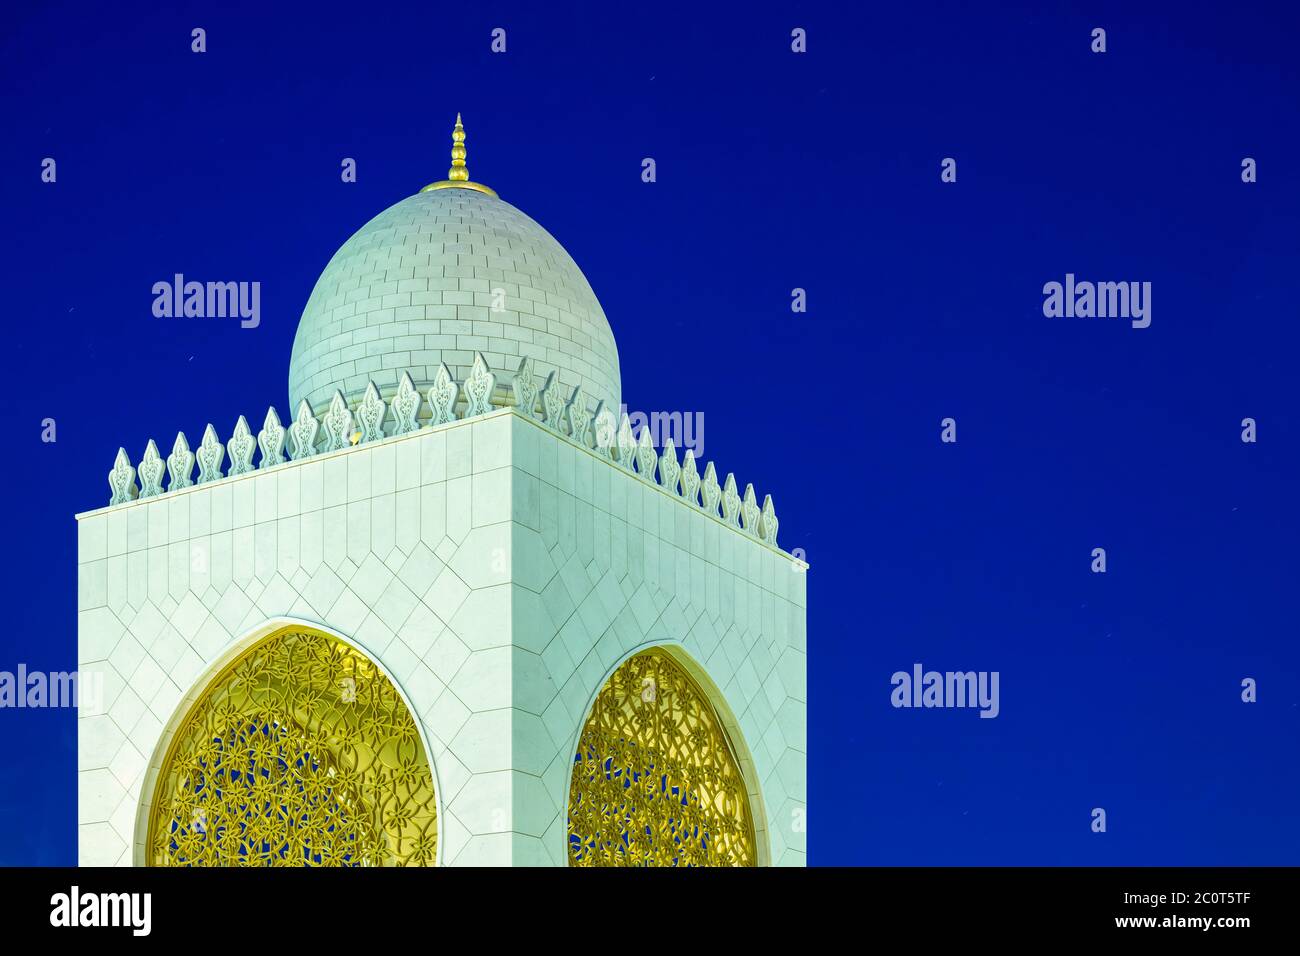 sheikh zayed grand mosque during coronavirus outbreak, oriental decoration in abu dhabi grand mosque, middle east Stock Photo